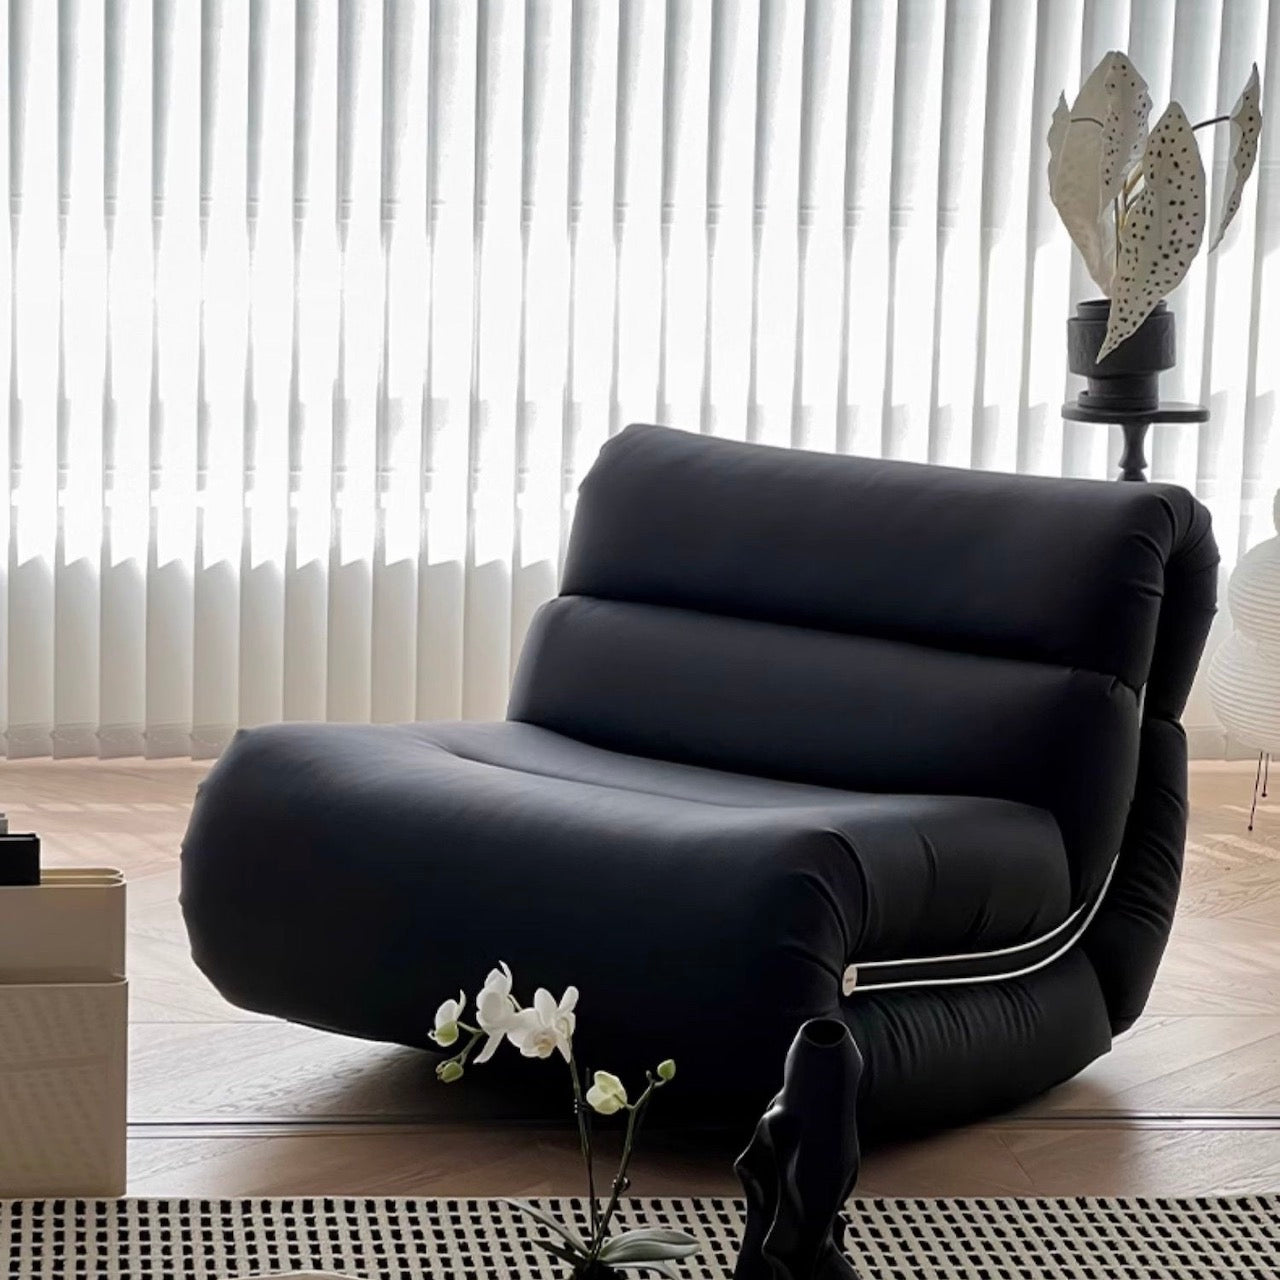 Stylish Black Caterpillar Lounge Chair with Rocking Feature